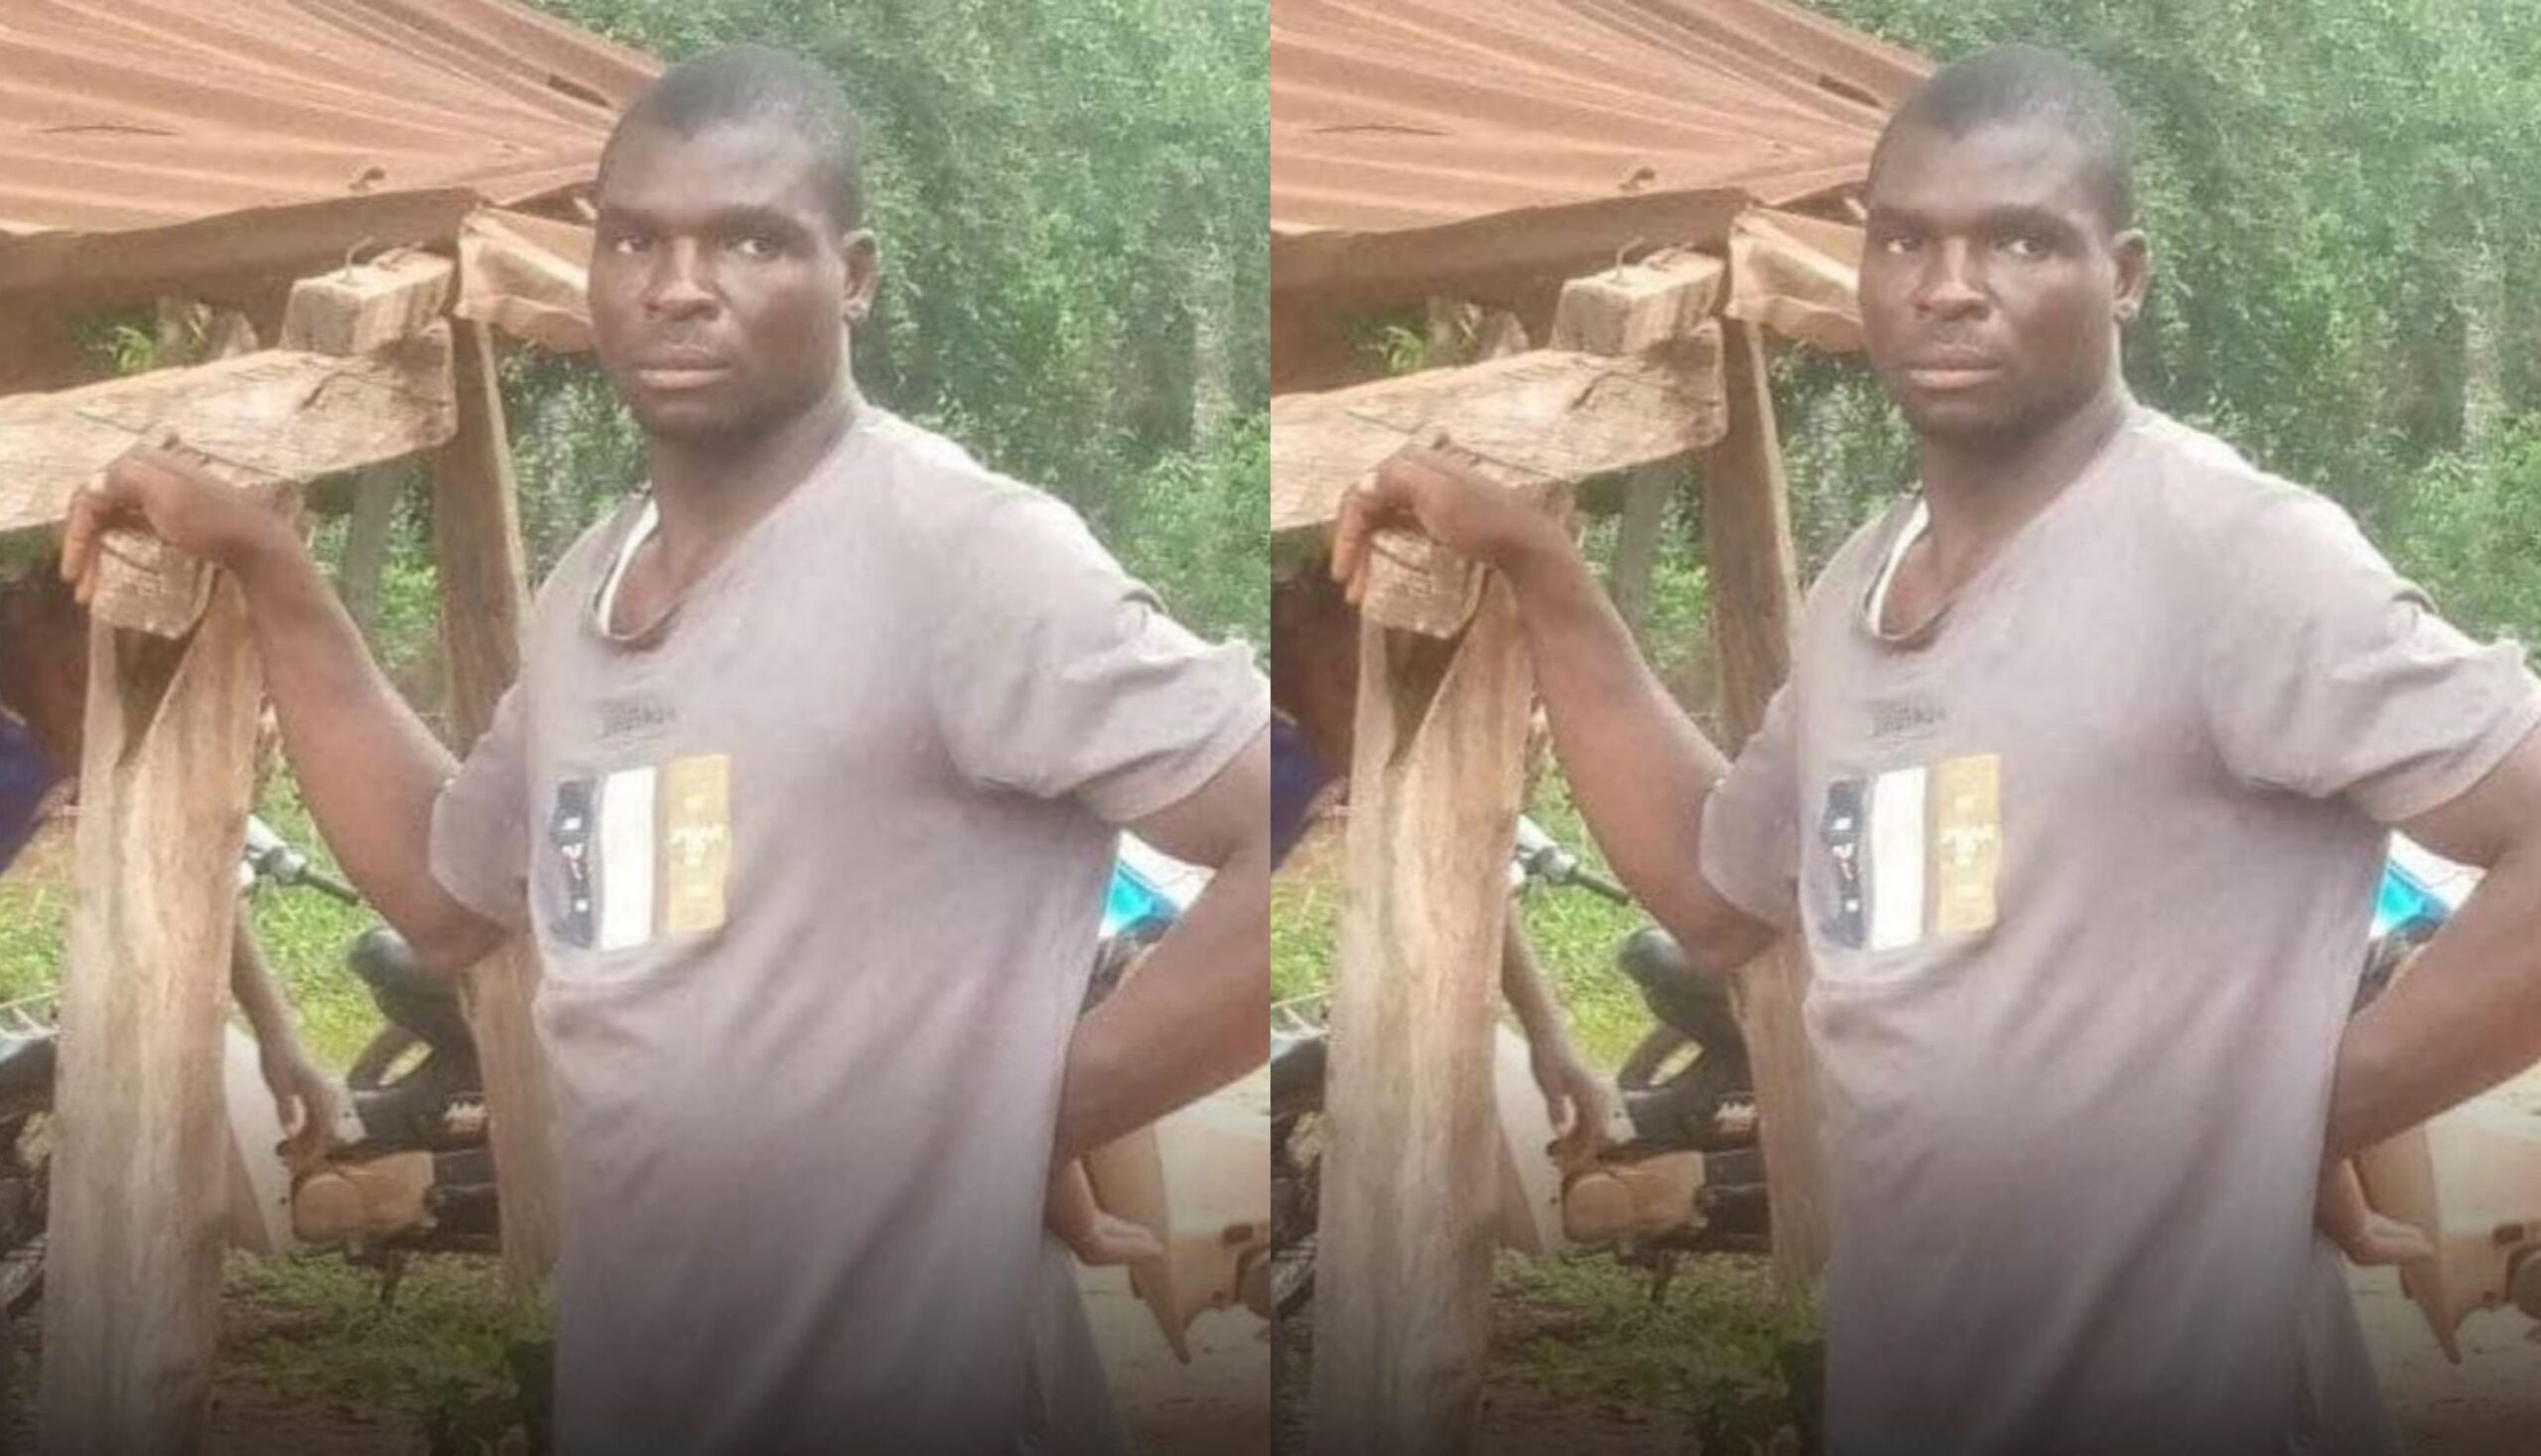 Daddy G.O sent packing away from community in Enugu state after Impregnating 10 females in his church (Video)